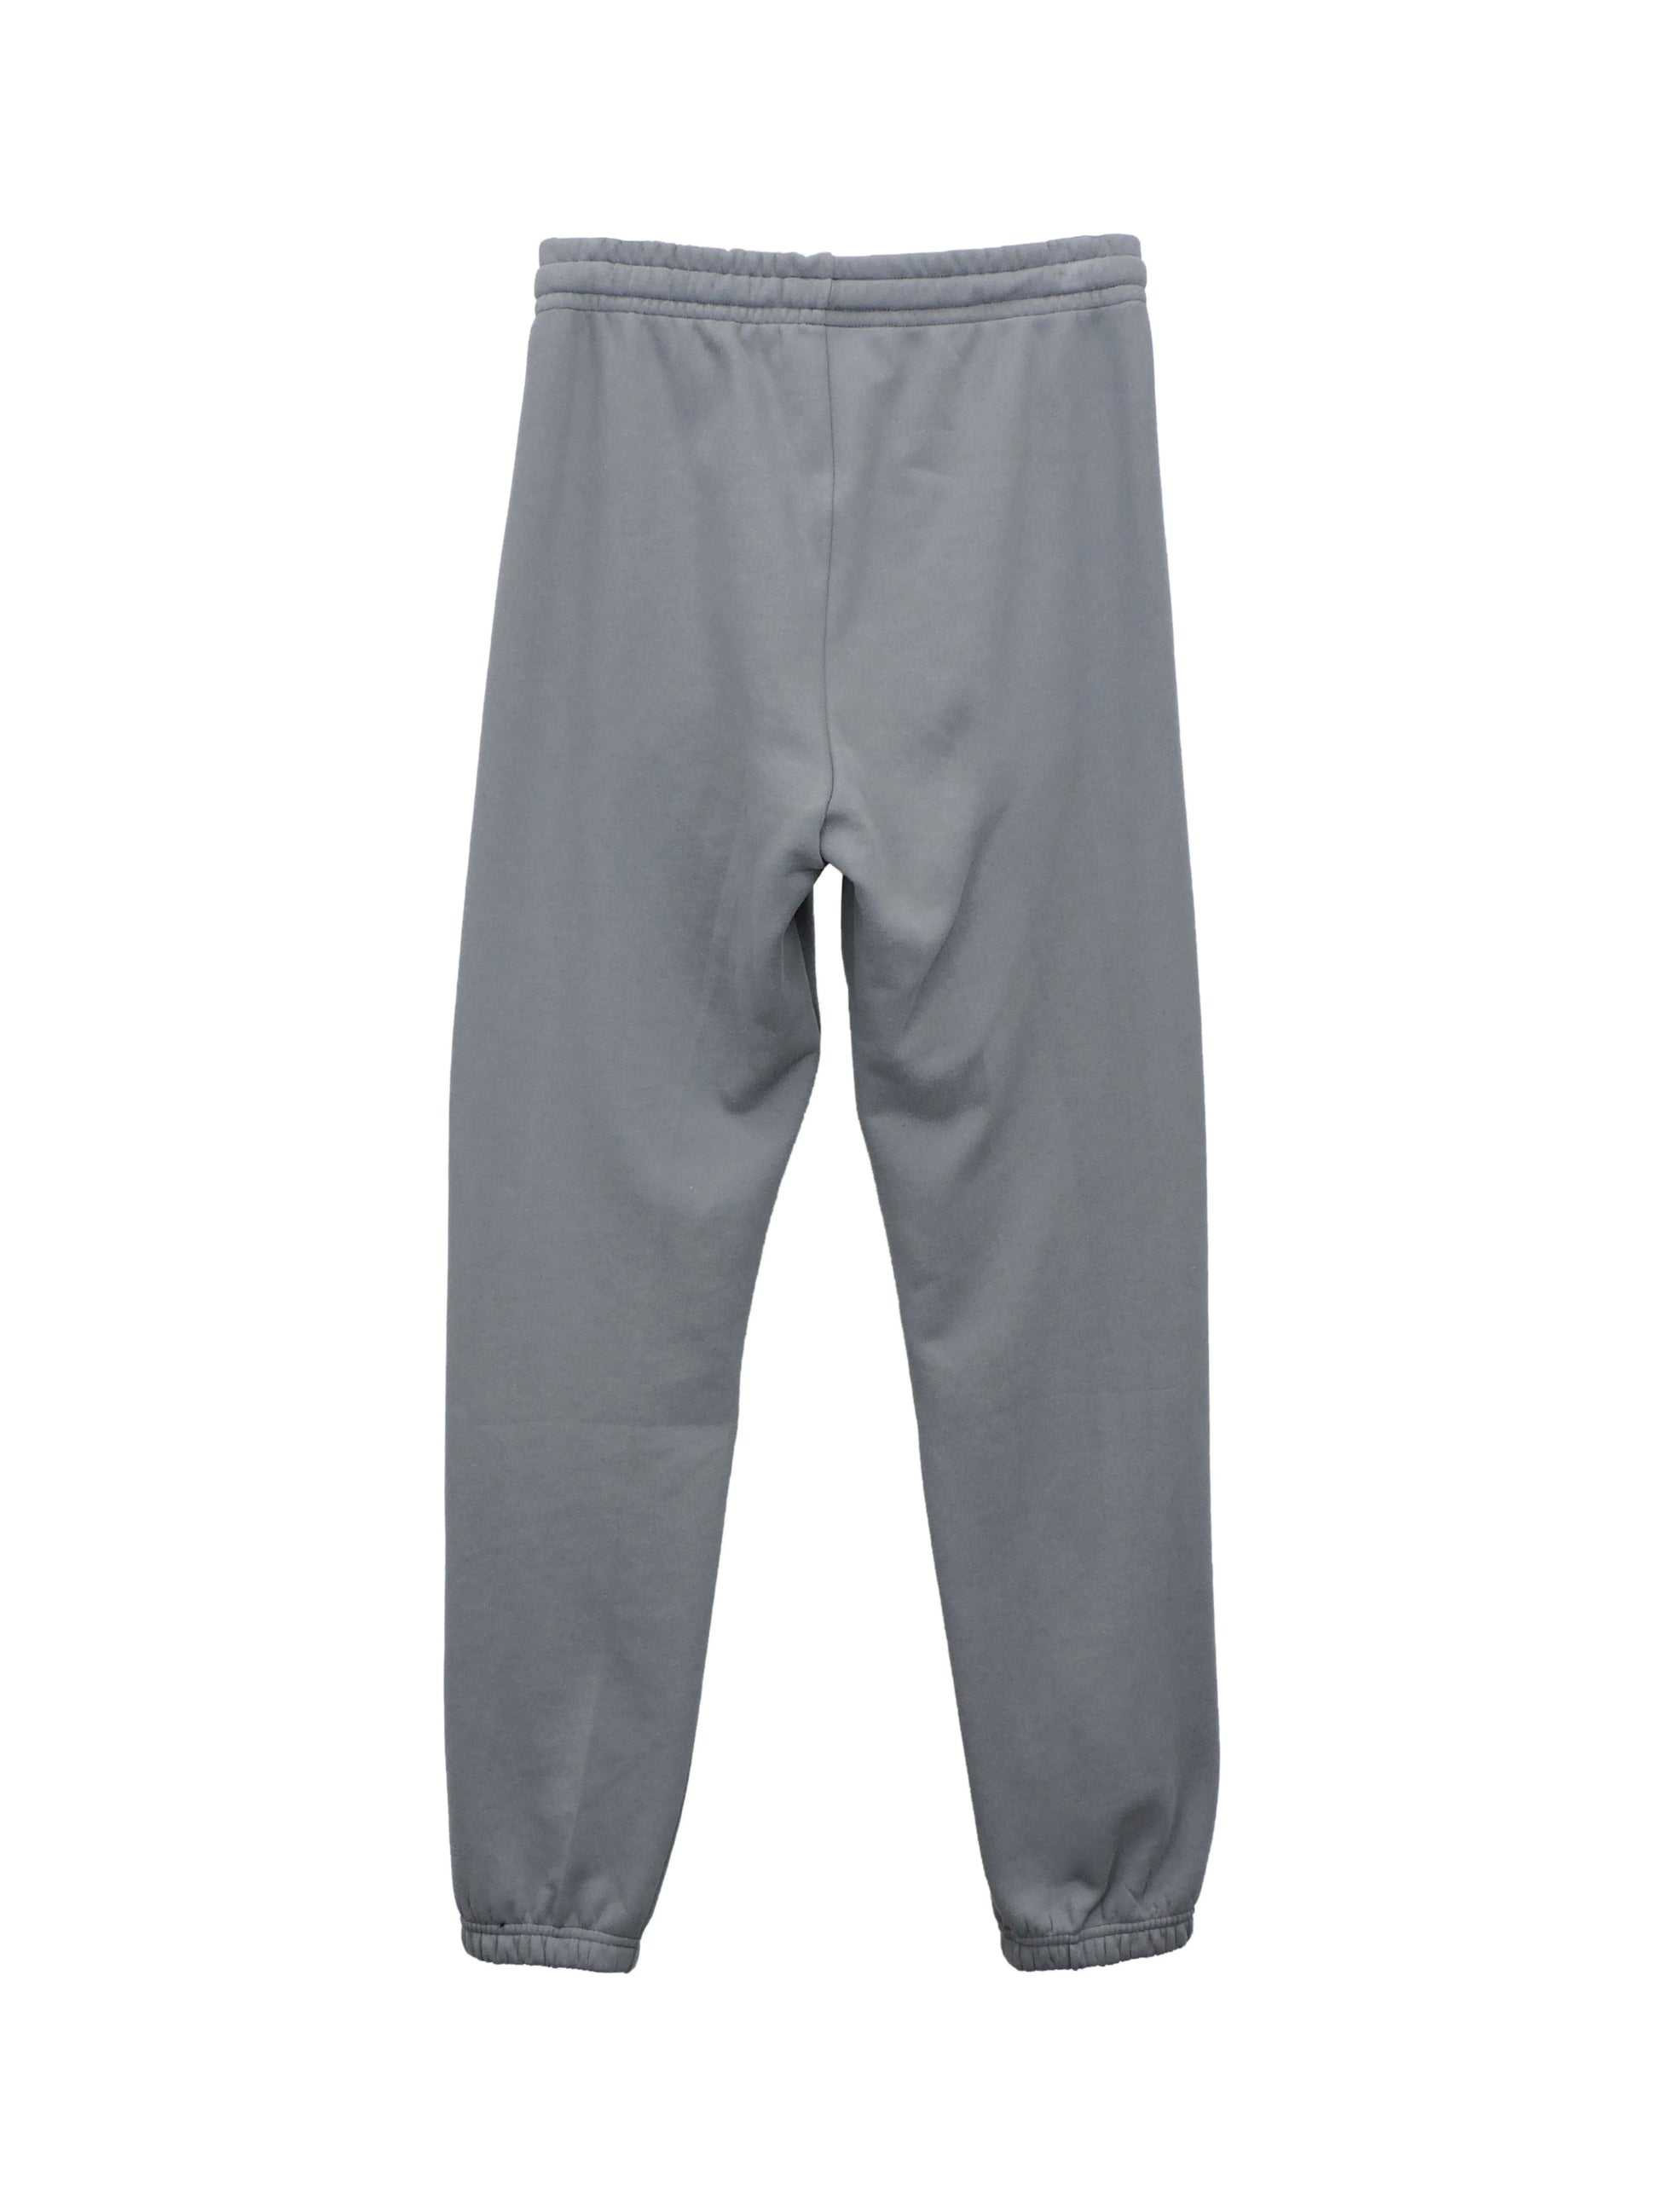 Pebble Grey French Terry Sweatpants